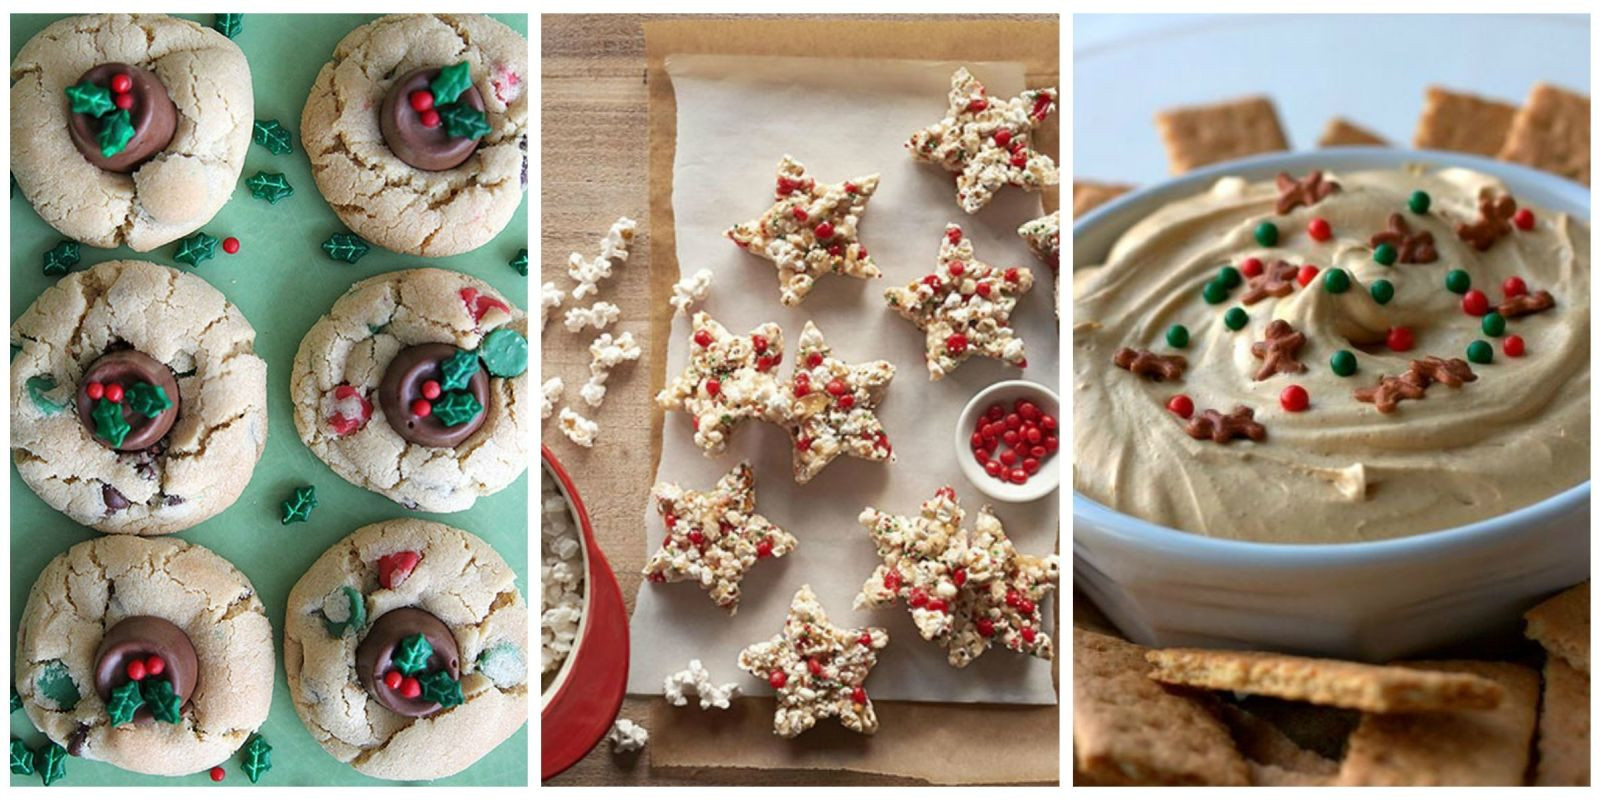 Desserts To Make For Christmas
 40 Easy Christmas Desserts Best Recipes and Ideas for